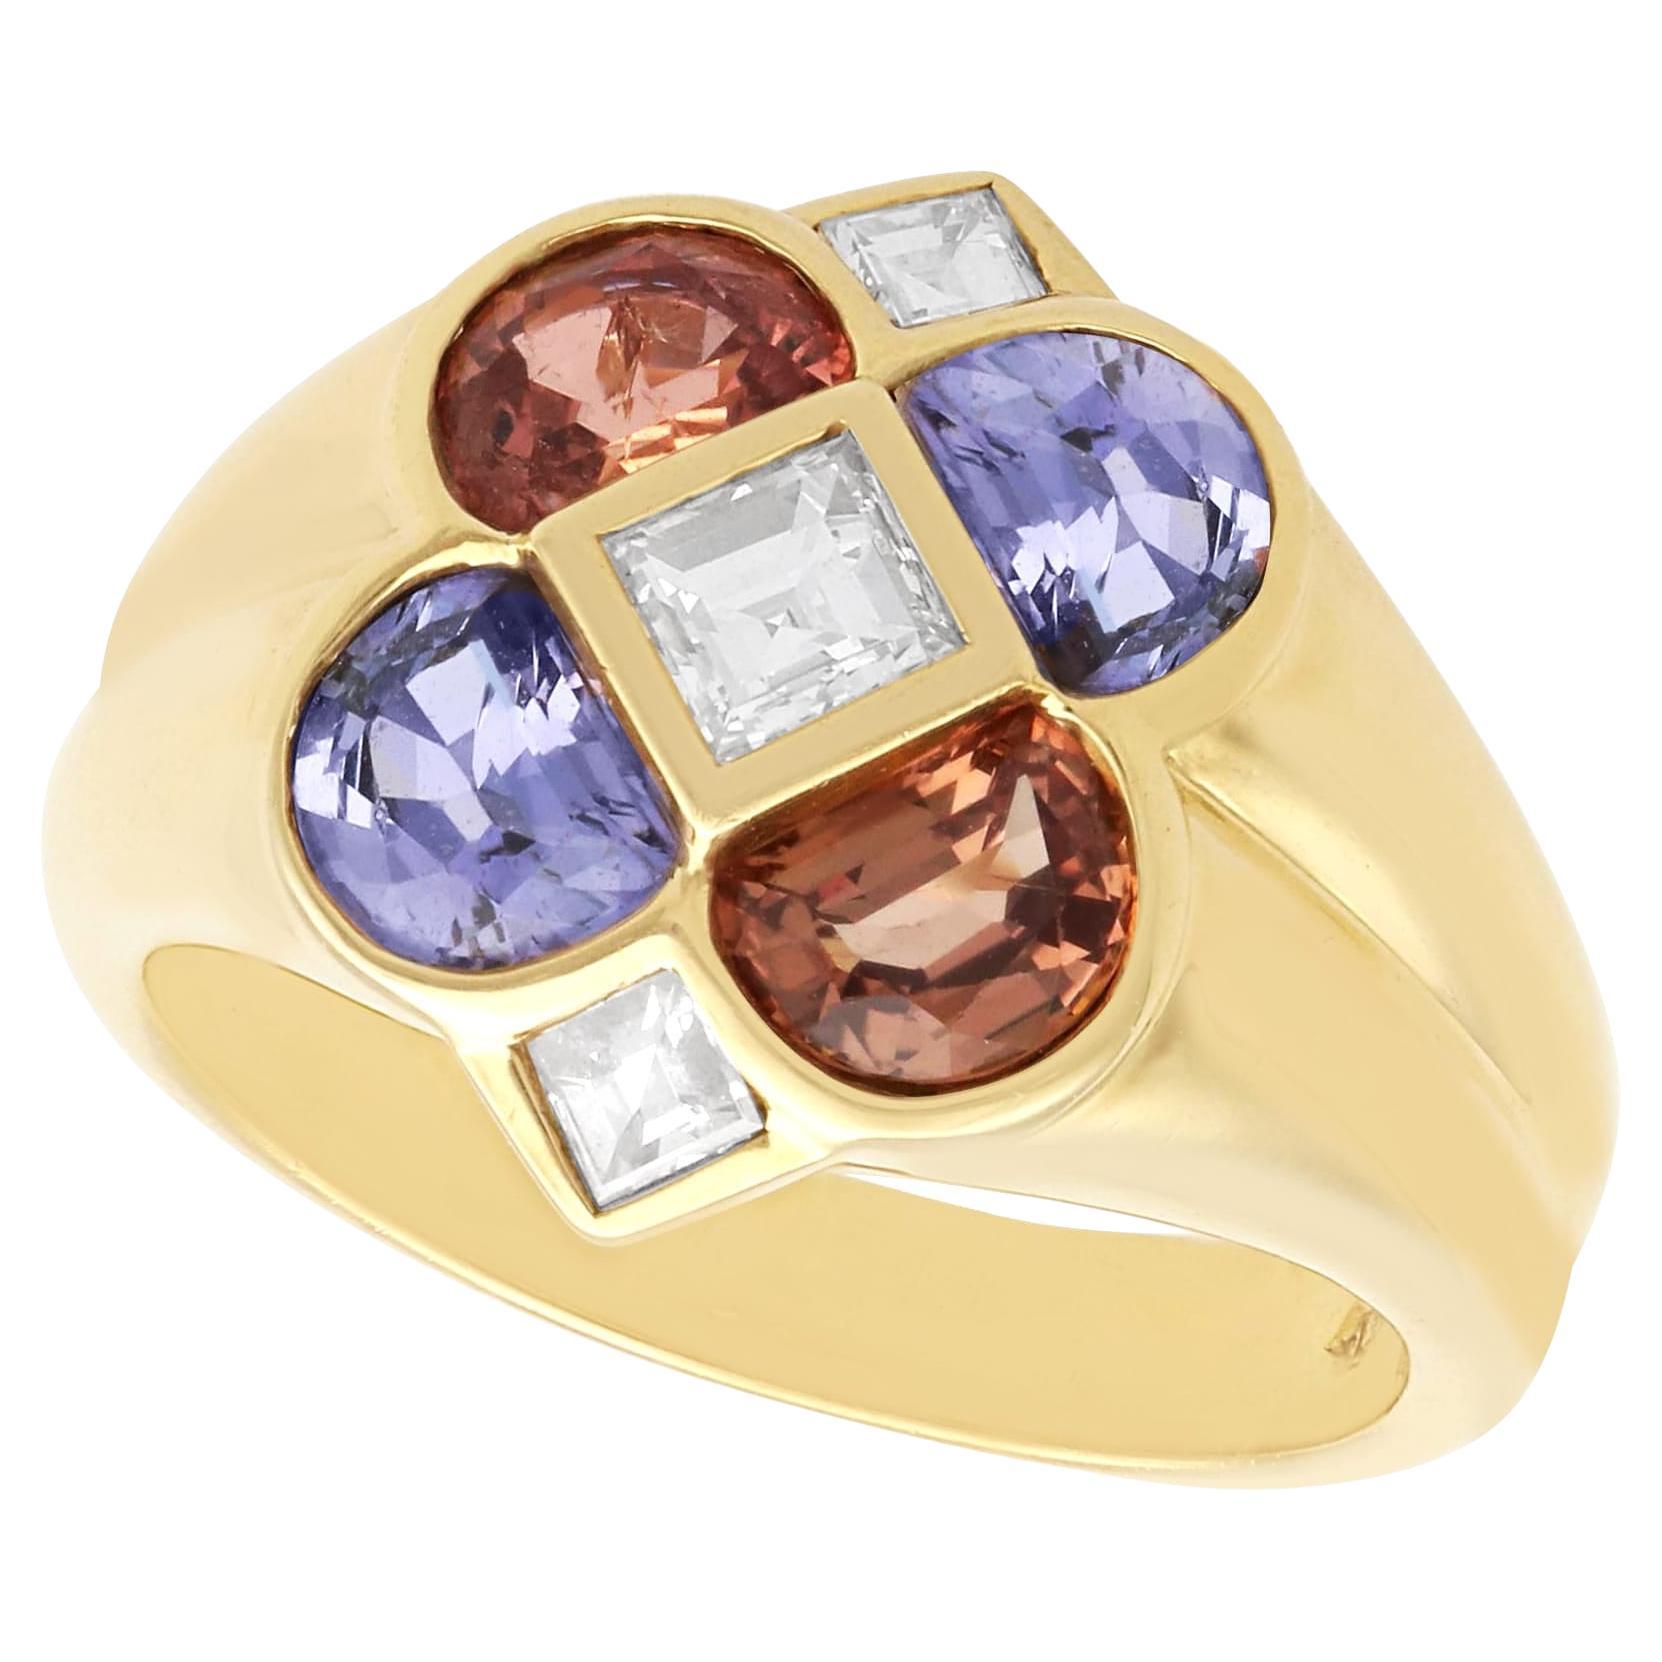 Vintage 1.95 Carat Purple and Brown-Pink Sapphire, Diamond and Yellow Gold Ring